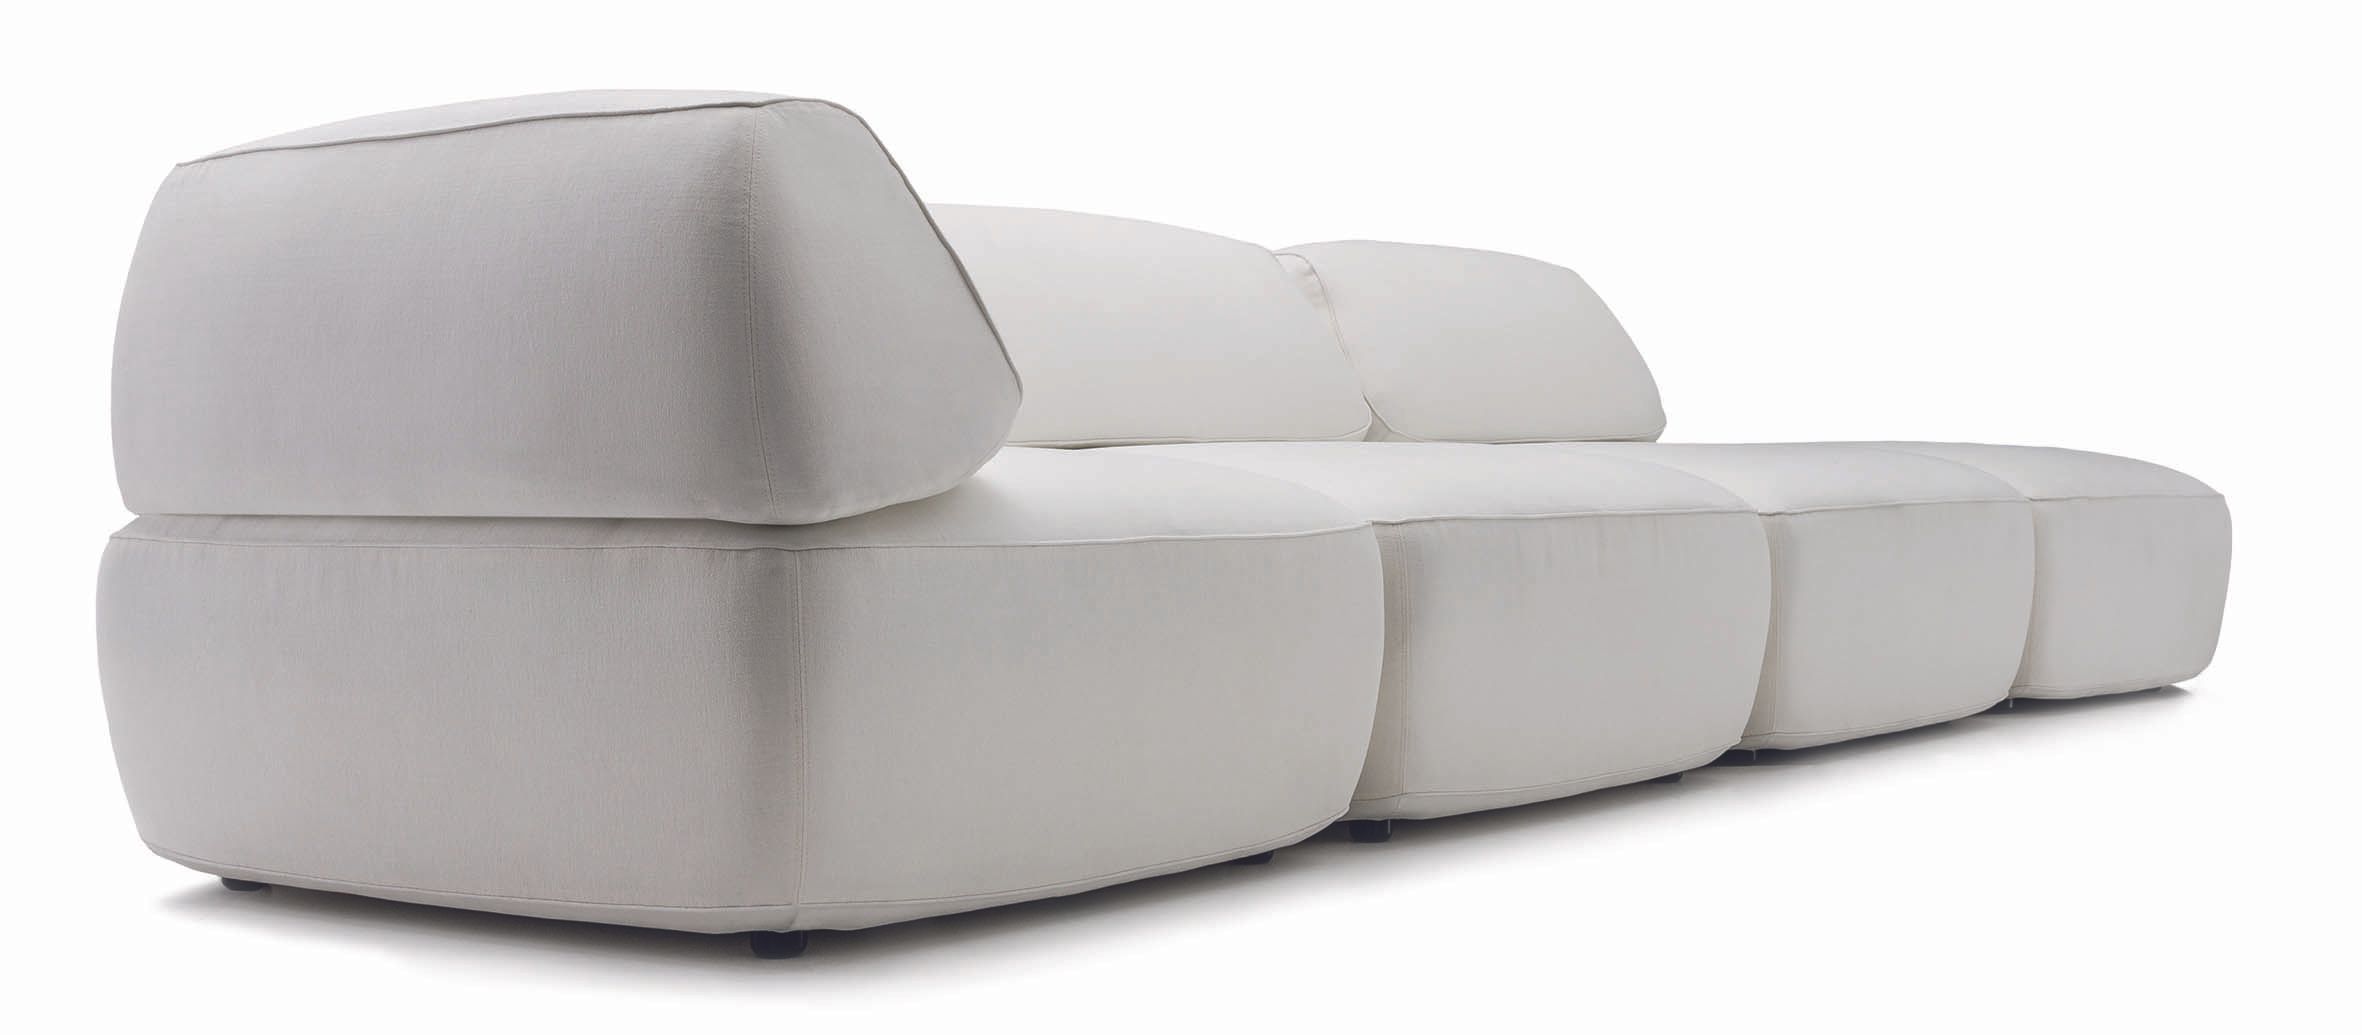 FAT TONY Project type: Sofa System, Couch, Armchair, Chaise Longue     Time:  2012-2013     Status: Available     Client: IP Design     Info: http://www.ipdesign.de     Photos: ipdesign   Furniture endlessly variable in use, in covers, in formation…     Fat Tony is a modular seating system whose ‘kit of parts’ allows a huge spectrum of variation possibilities. Designed by the architecture brand GRAFT, Fat Tony is endlessly flexible in use with its three cubic modules. Bachelor pad or loft, living room or hotel lobby – Fat Tony is at home anywhere. Its different elements make it uniquely versatile and make it look great in any location.   